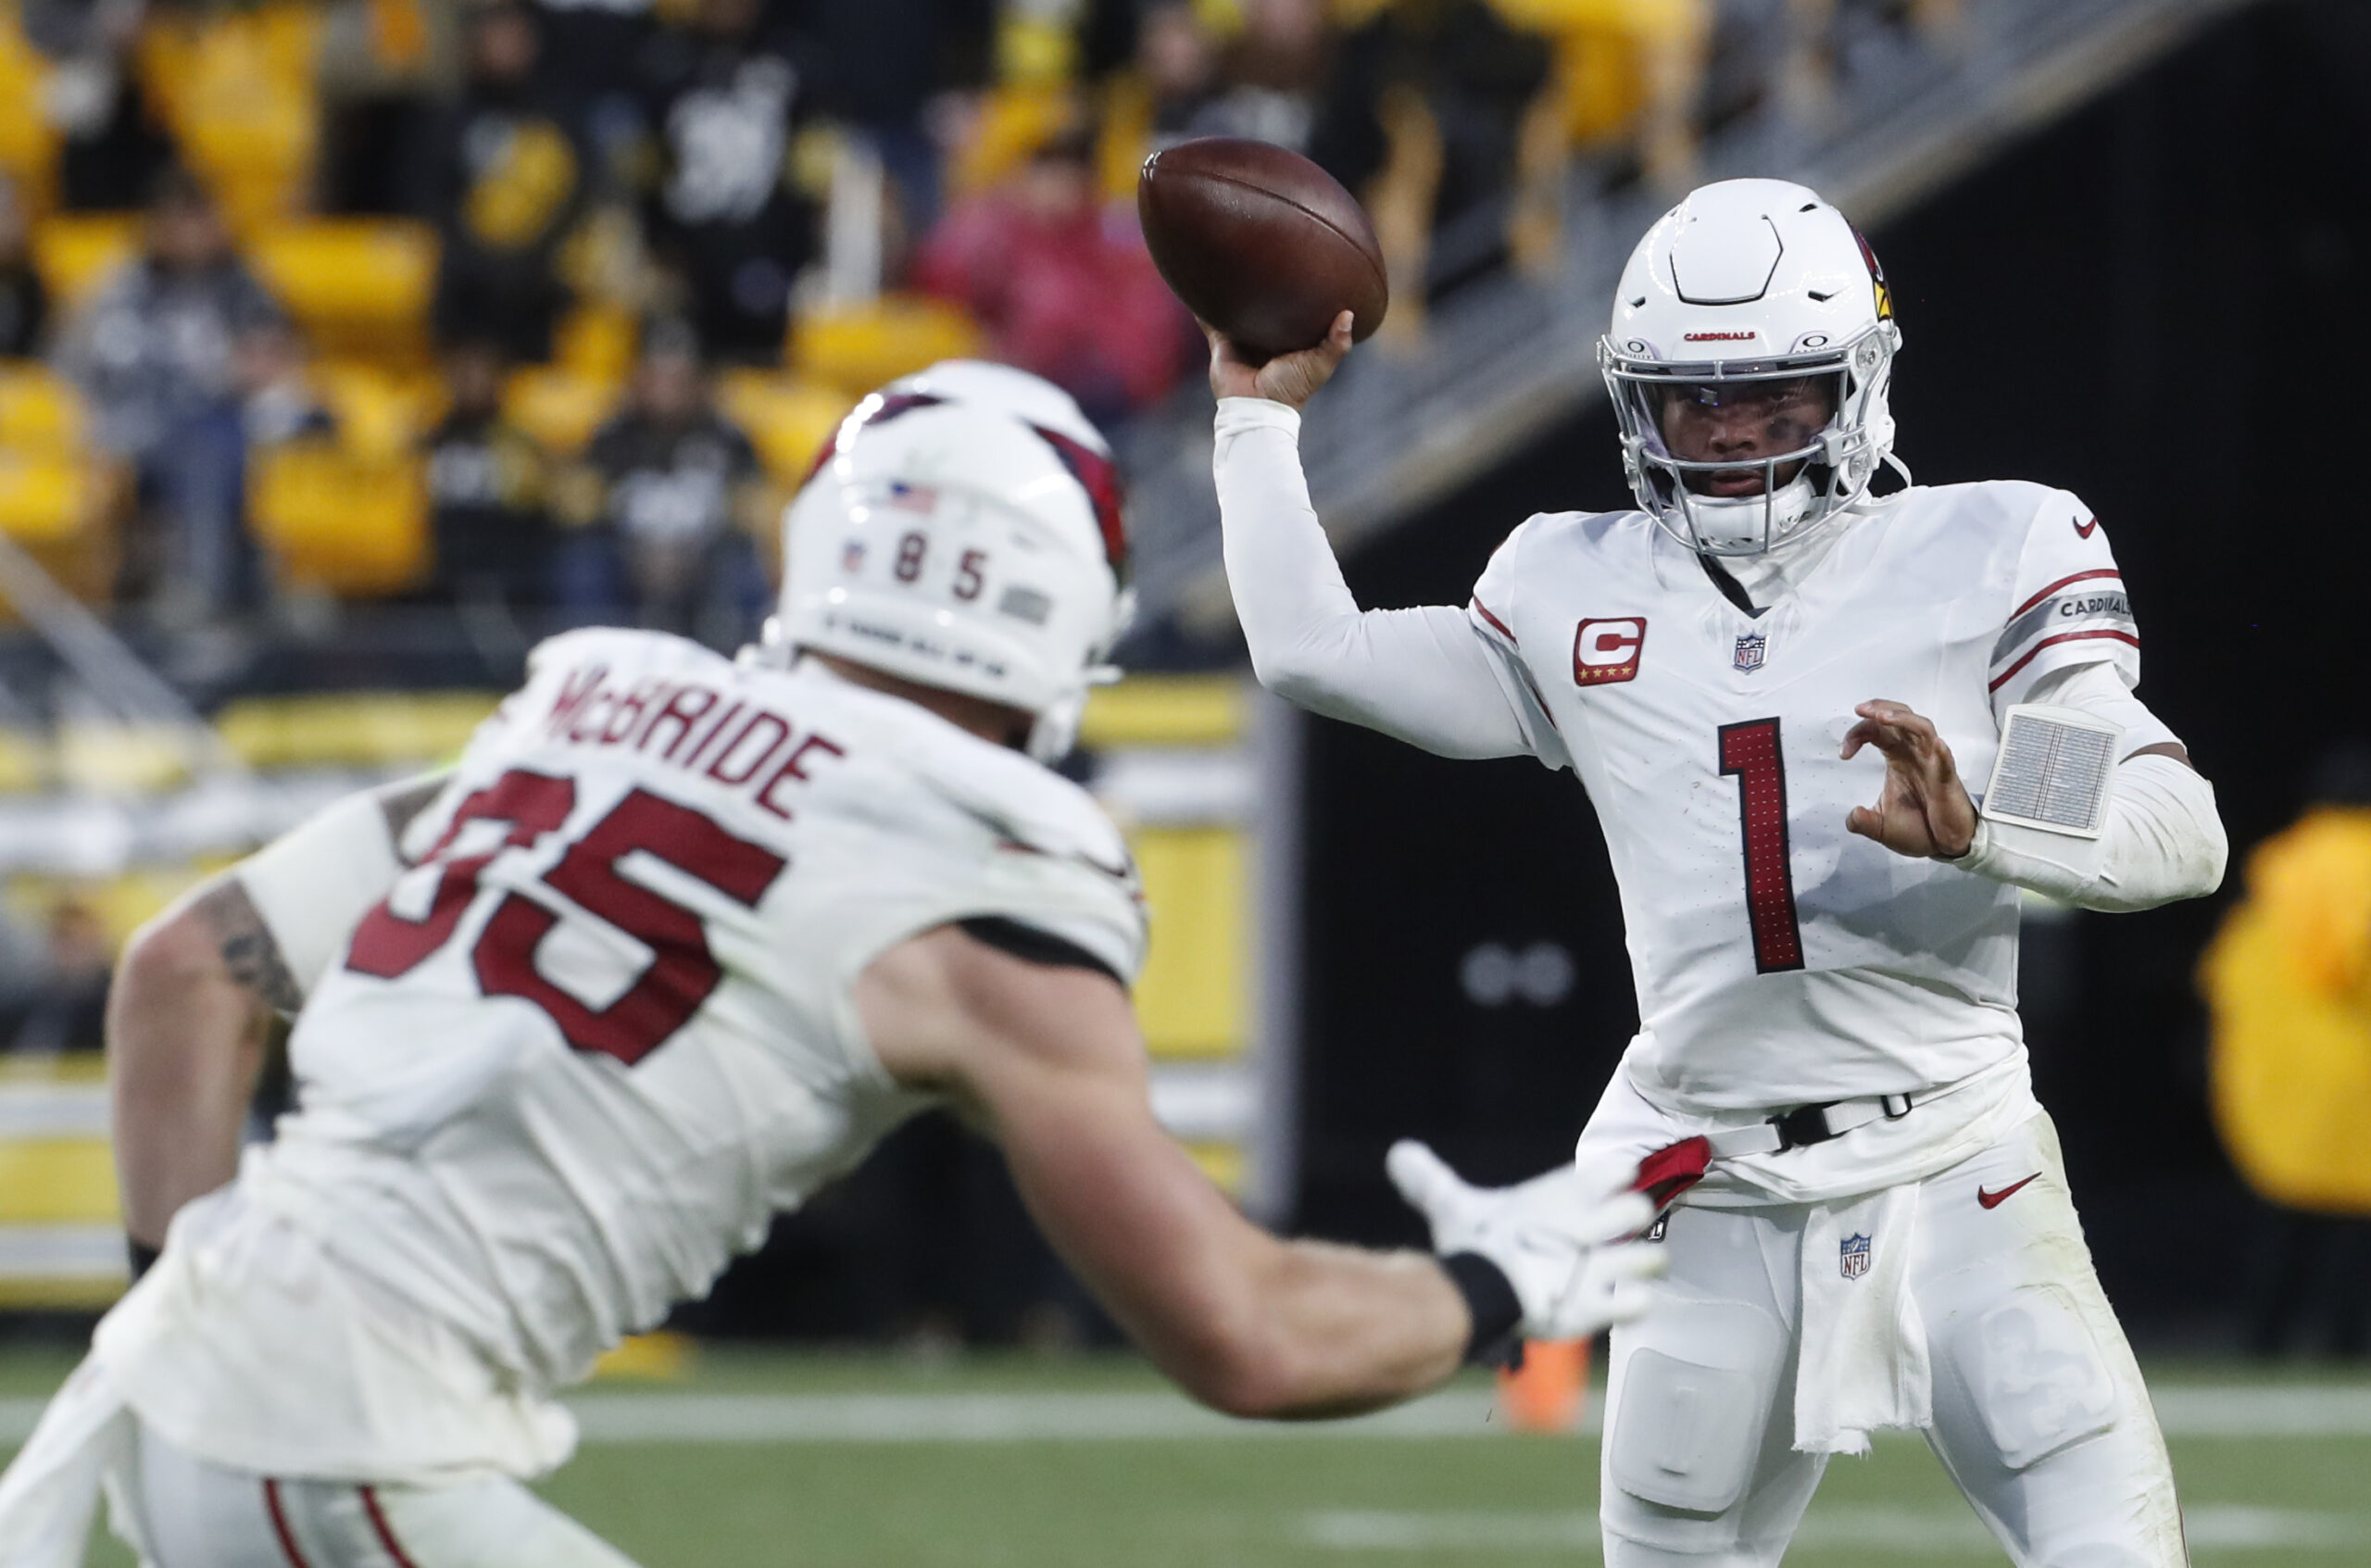 Cardinals vs. Eagles predictions, odds, injury news for Sunday's game